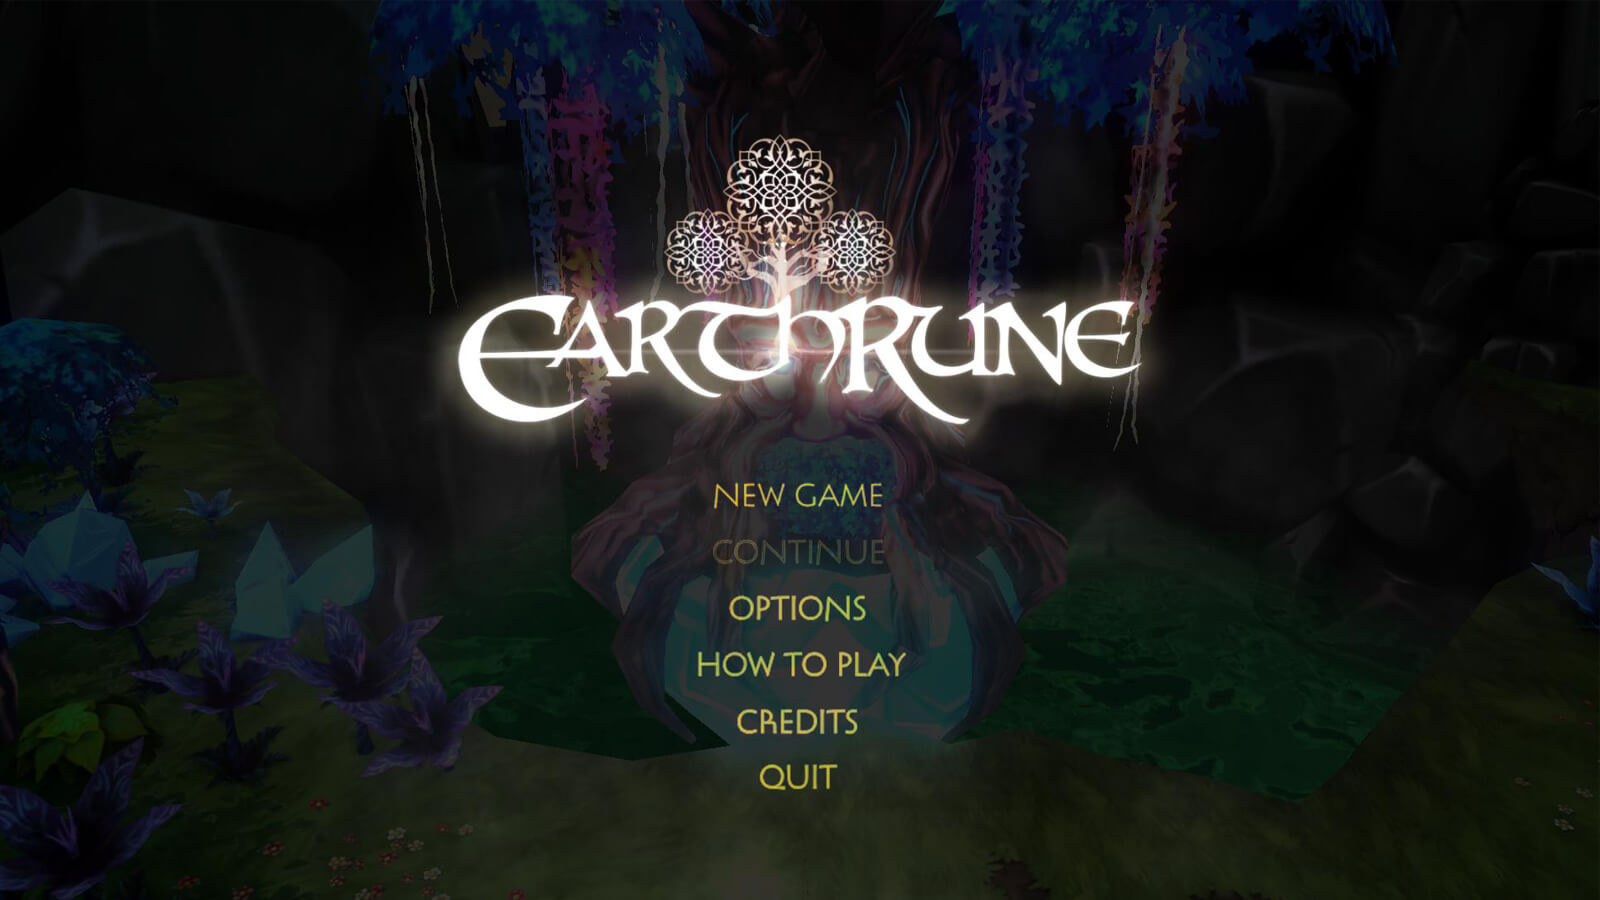 The main title screen includes New Game, Continue, Options, How to Play, and Credits selections